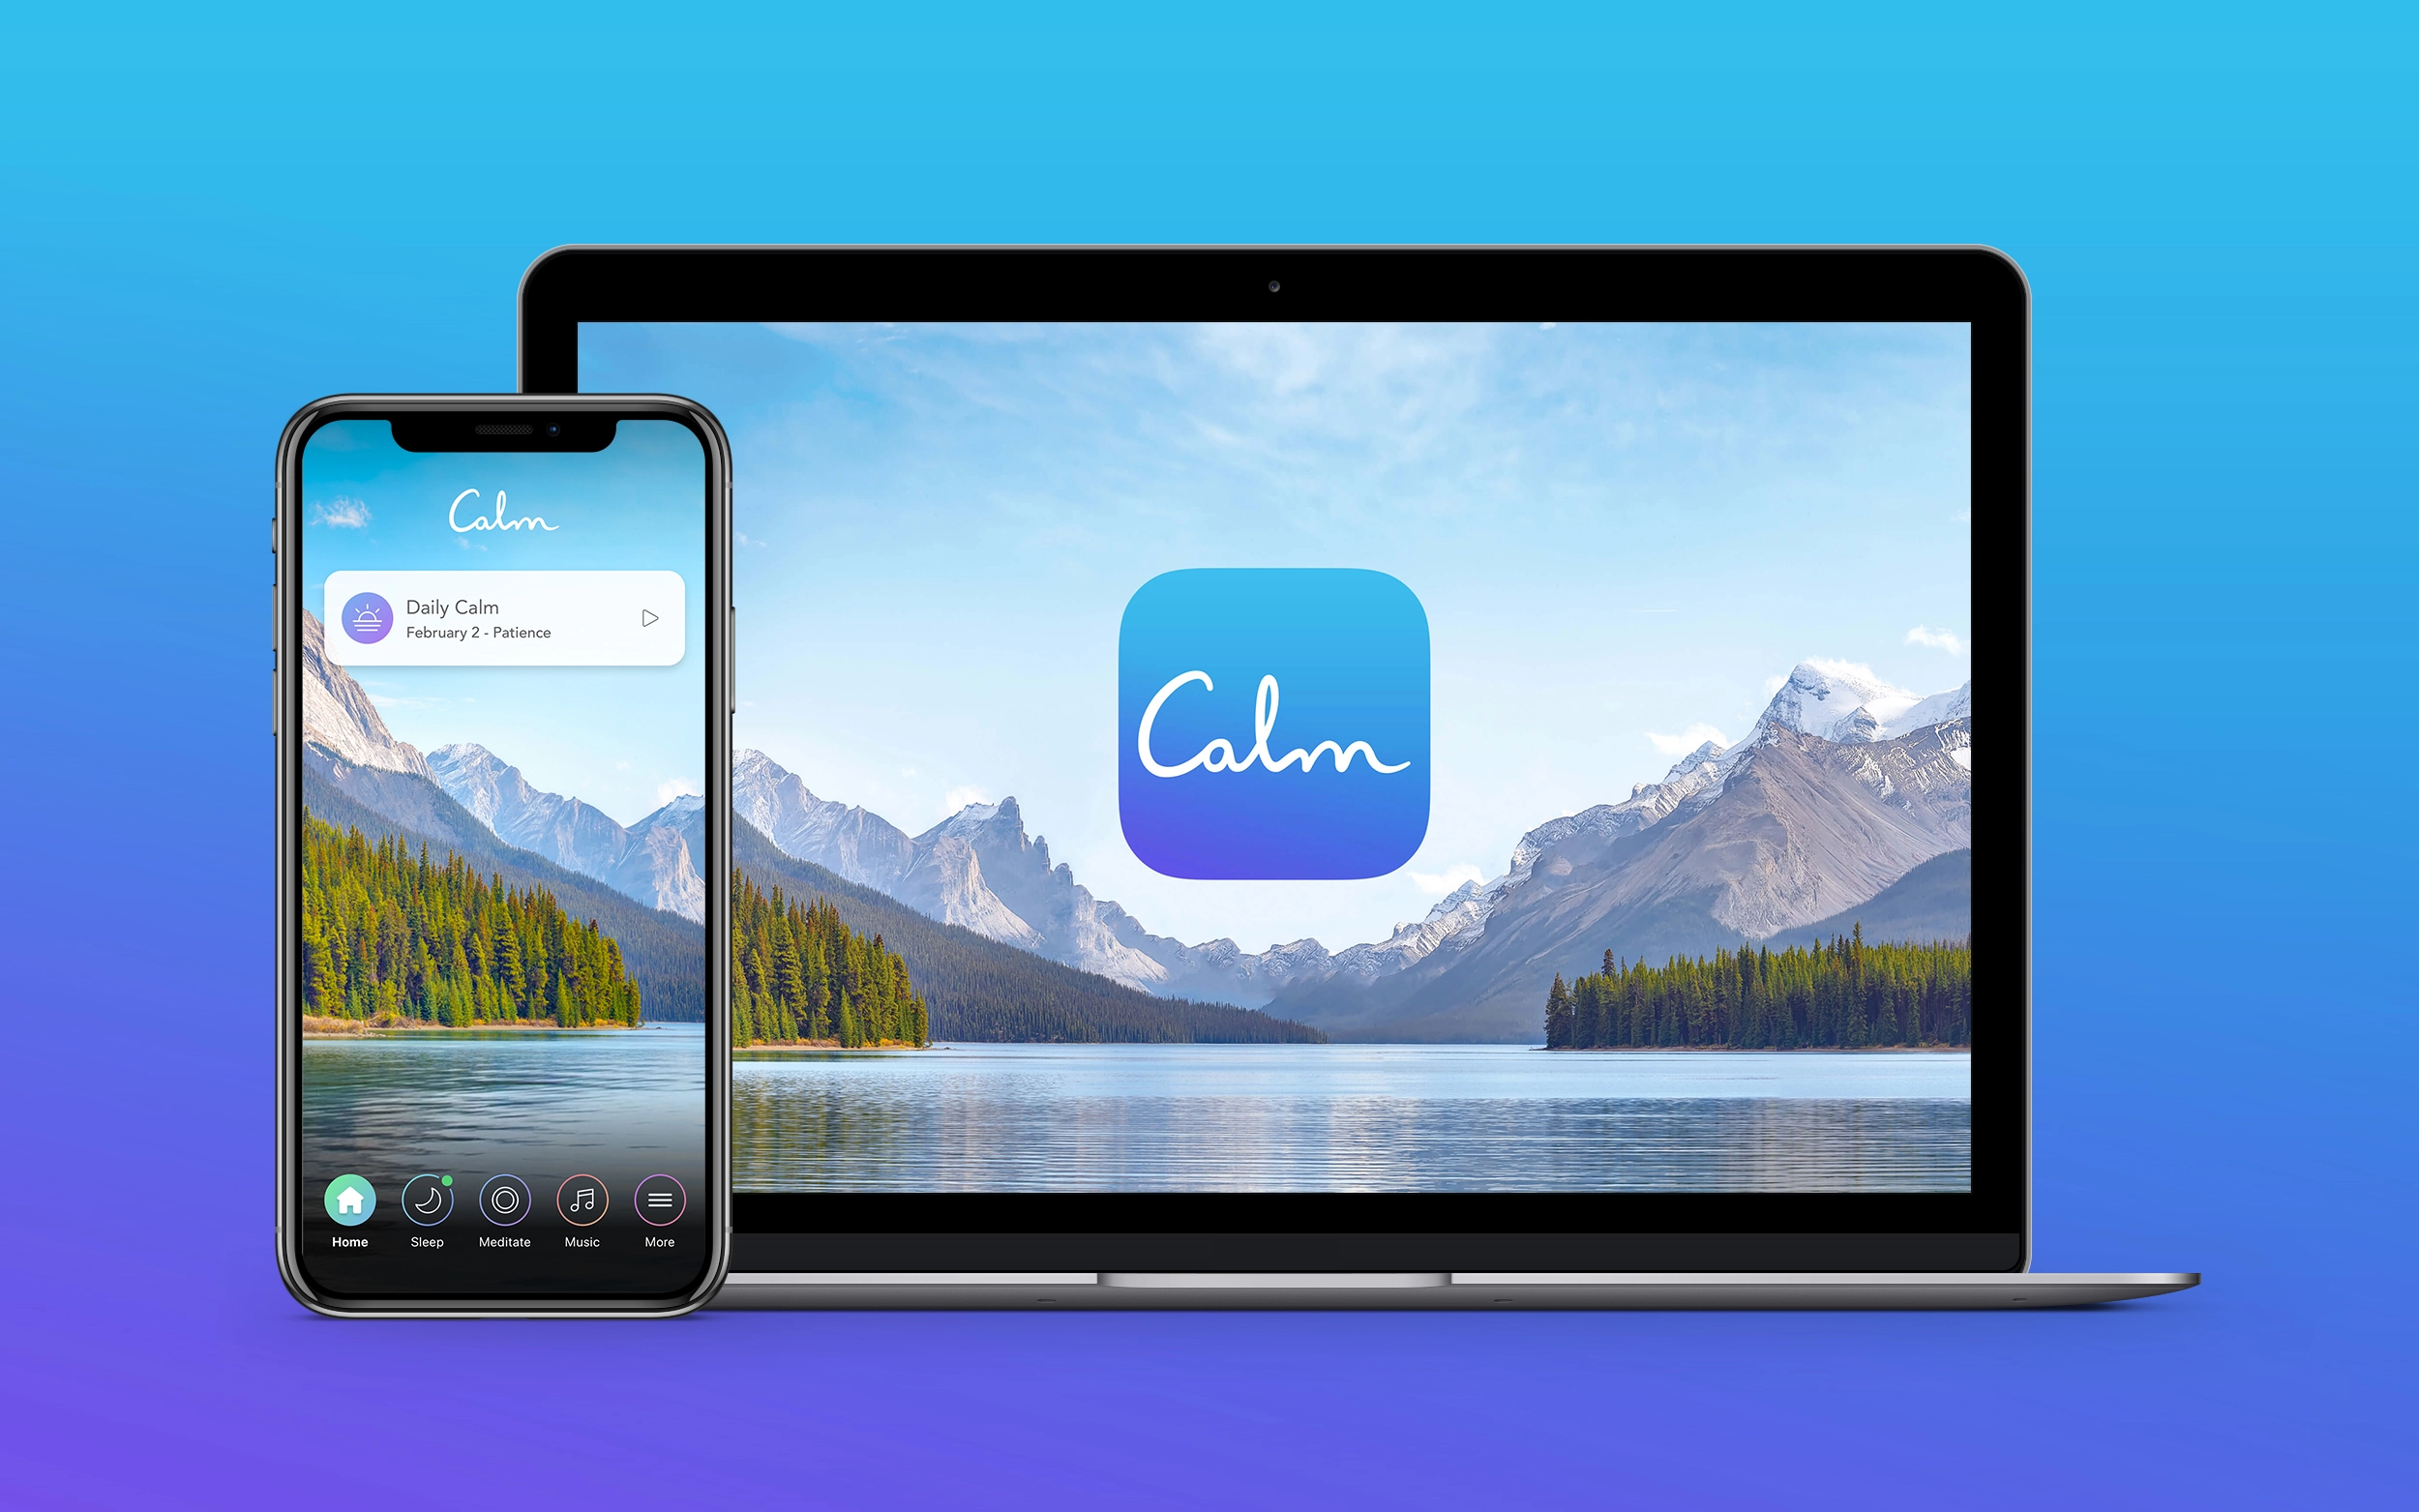 Calm Premium - 3 Months Trial Subscription Key (ONLY FOR NEW ACCOUNTS) $0.8